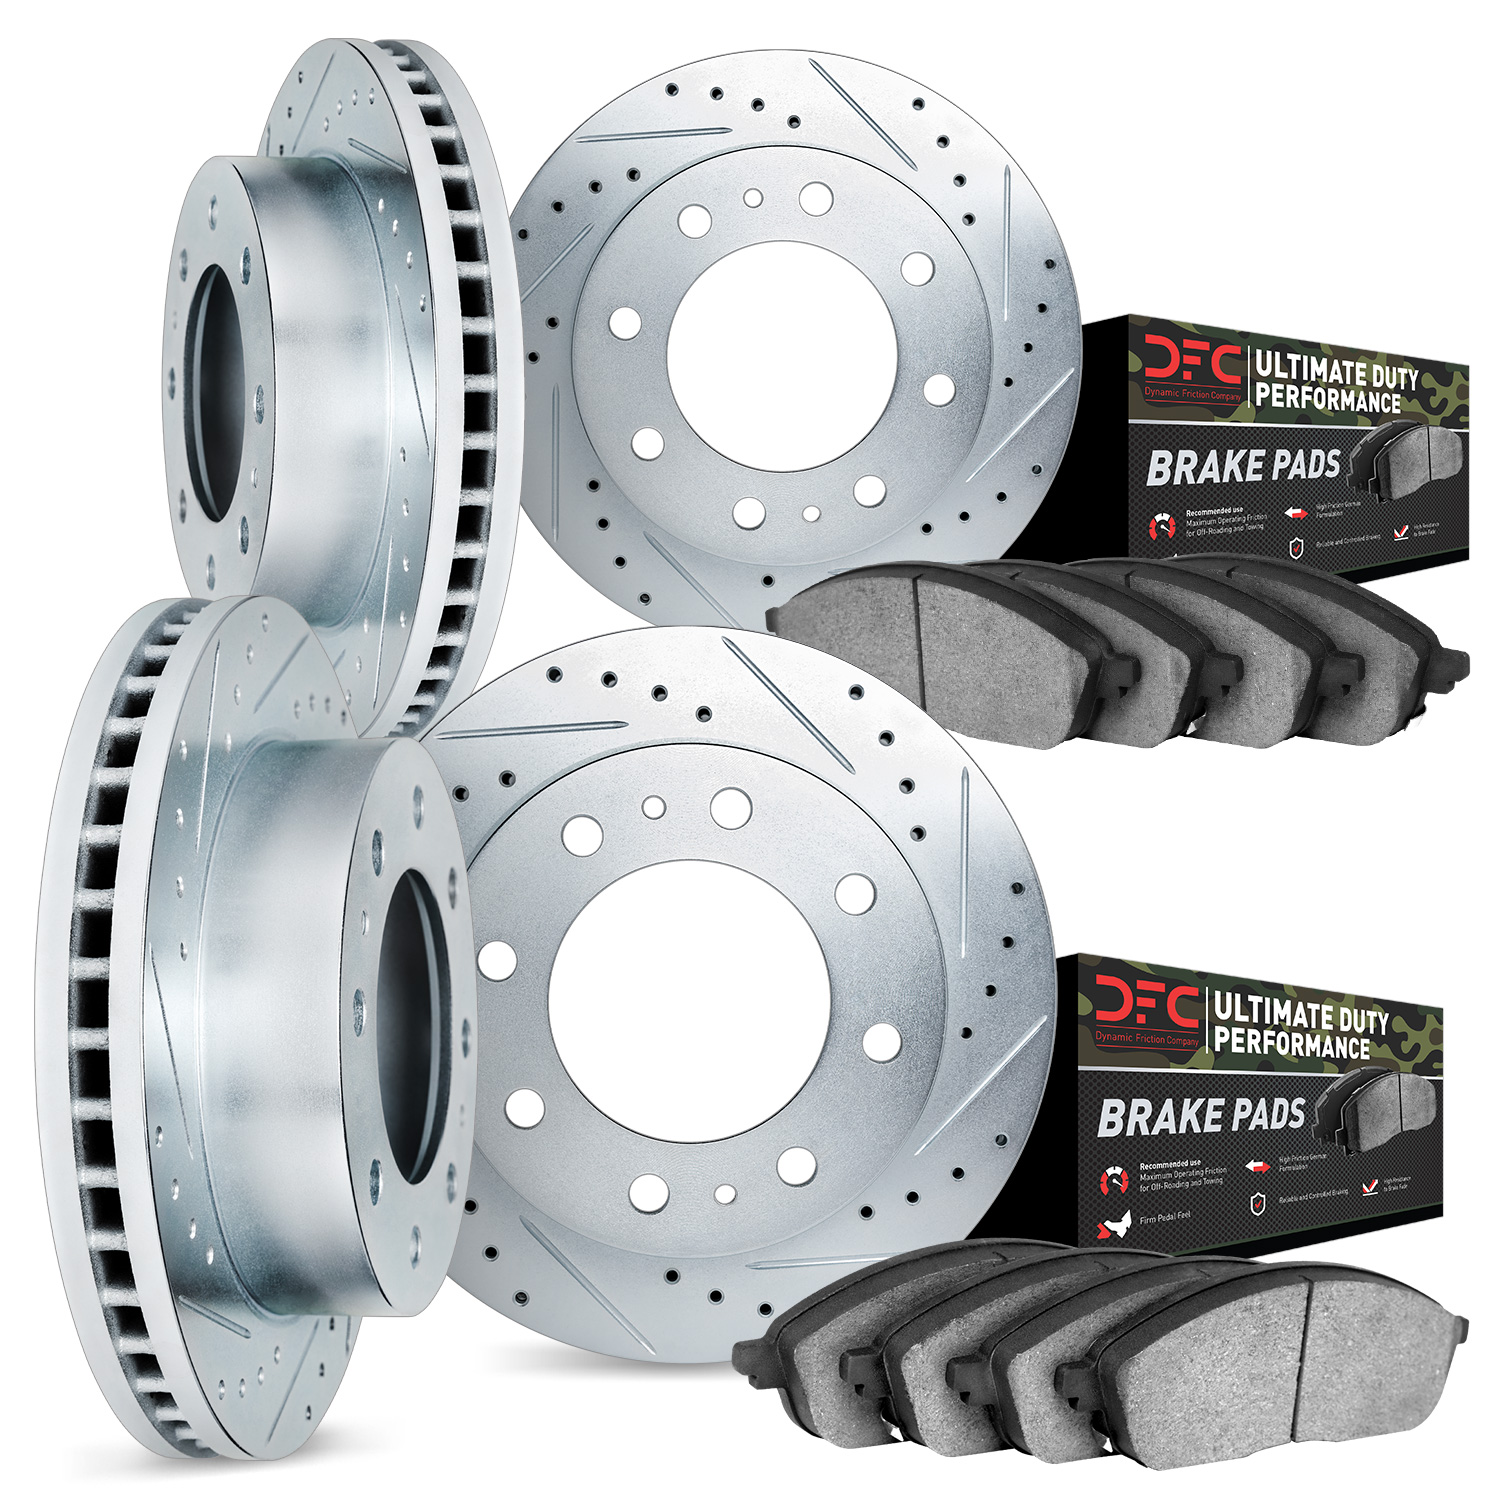 7404-48017 Drilled/Slotted Brake Rotors with Ultimate-Duty Brake Pads Kit [Silver], 2009-2020 GM, Position: Front and Rear